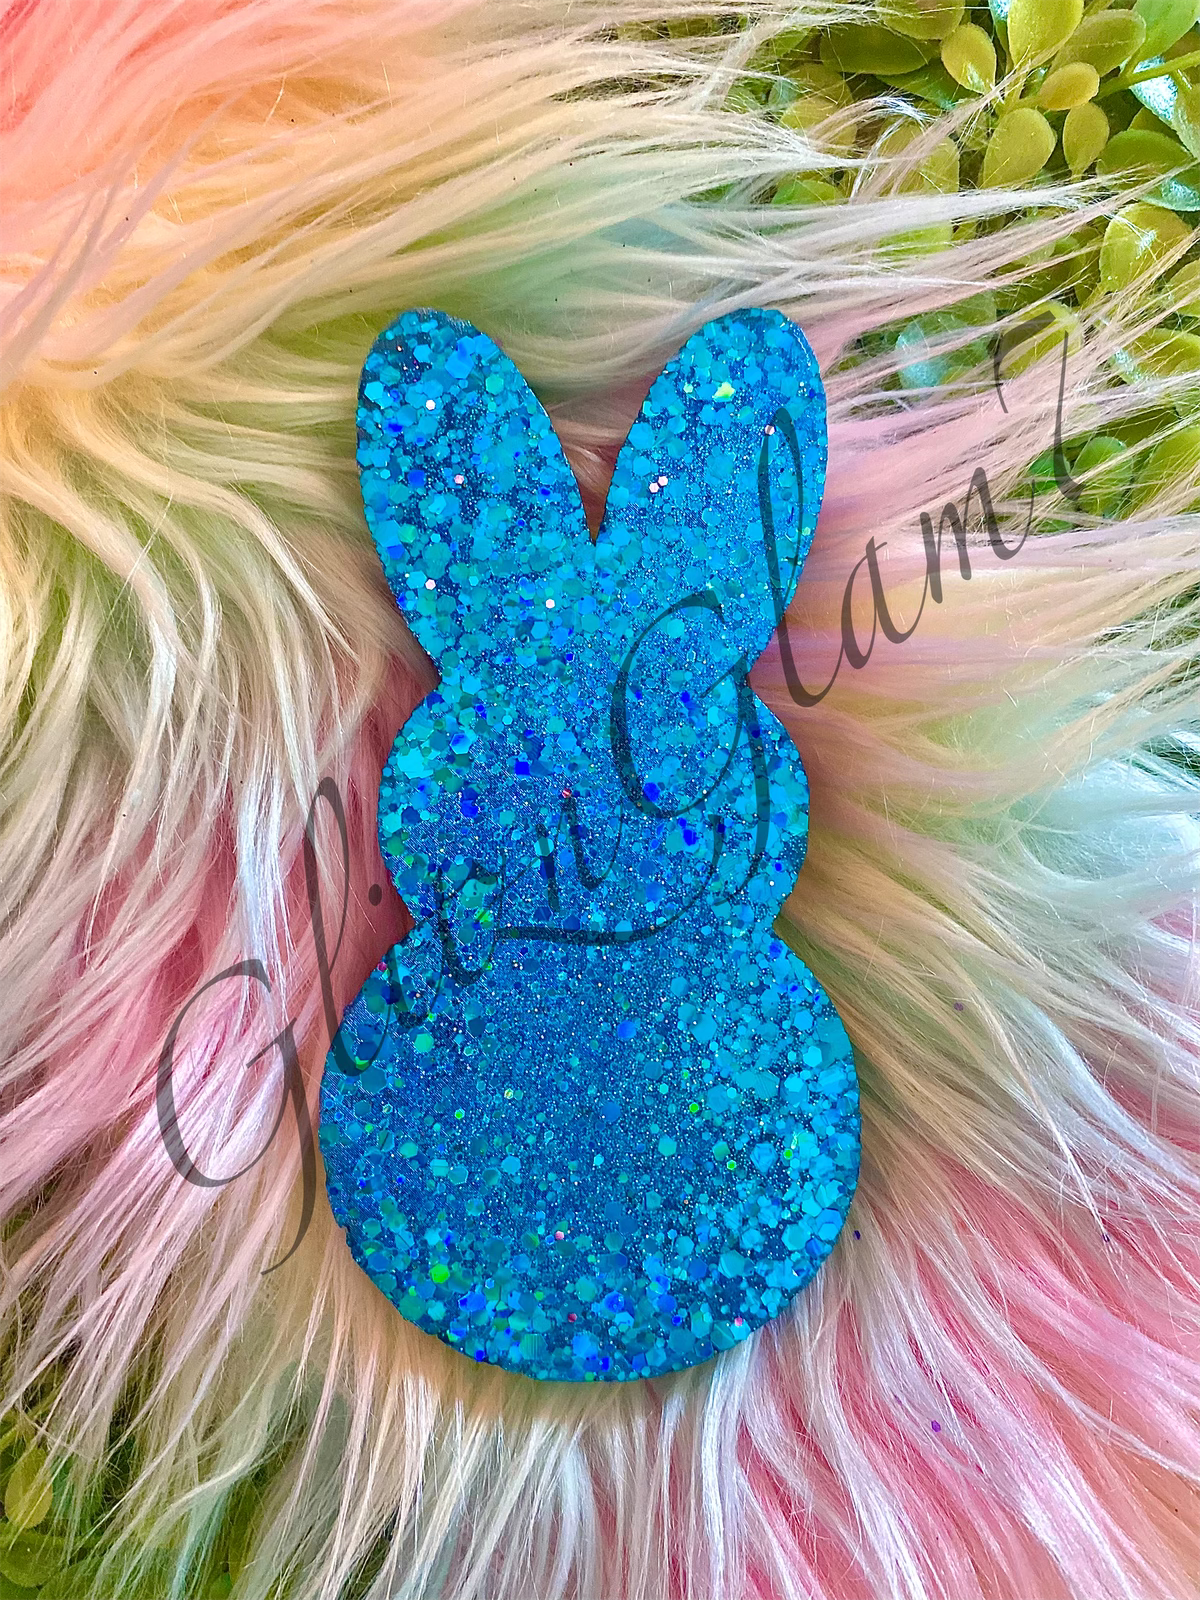 Plain Bunny - (NO TAIL) Freshie Silicone Molds